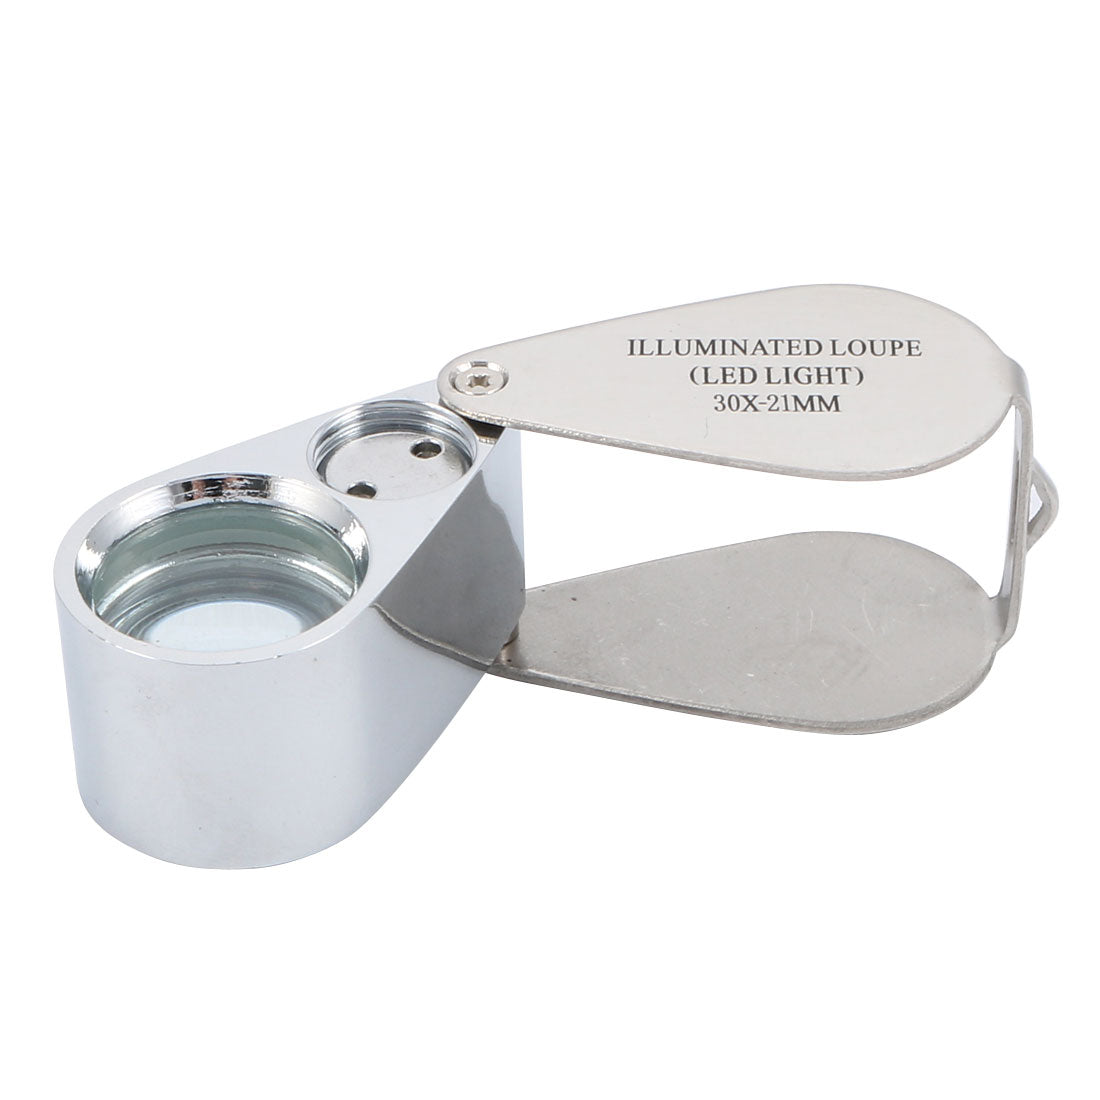 uxcell Uxcell Mini Portable Folding Loupe Metal Magnifier Magnifying Eye Glass Lens 30X w LED Light